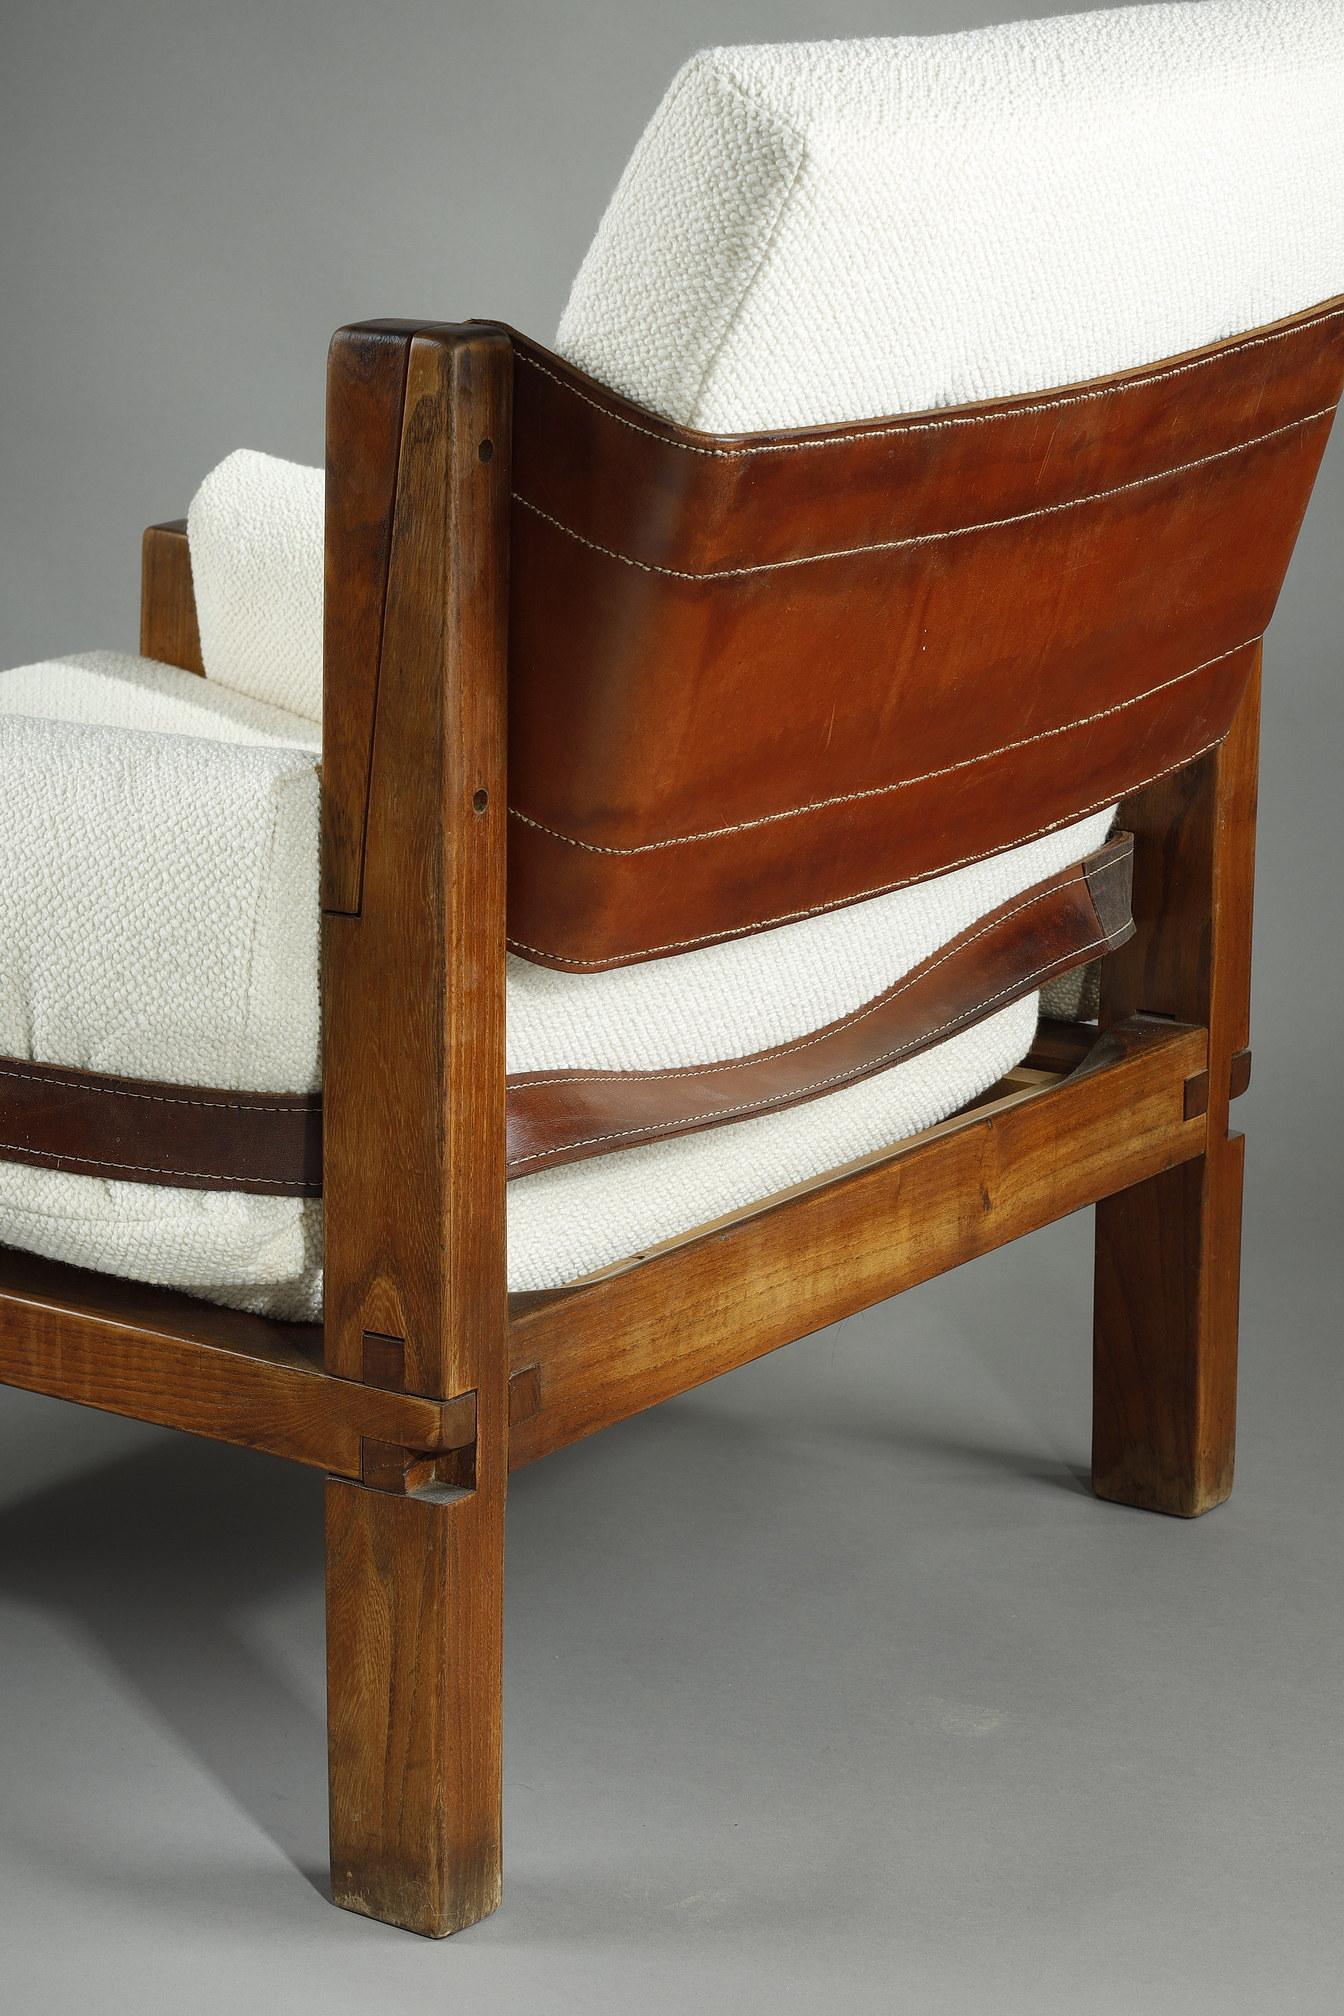 Armchair by Pierre CHAPO from the 1970s, S15 MODEL For Sale 6